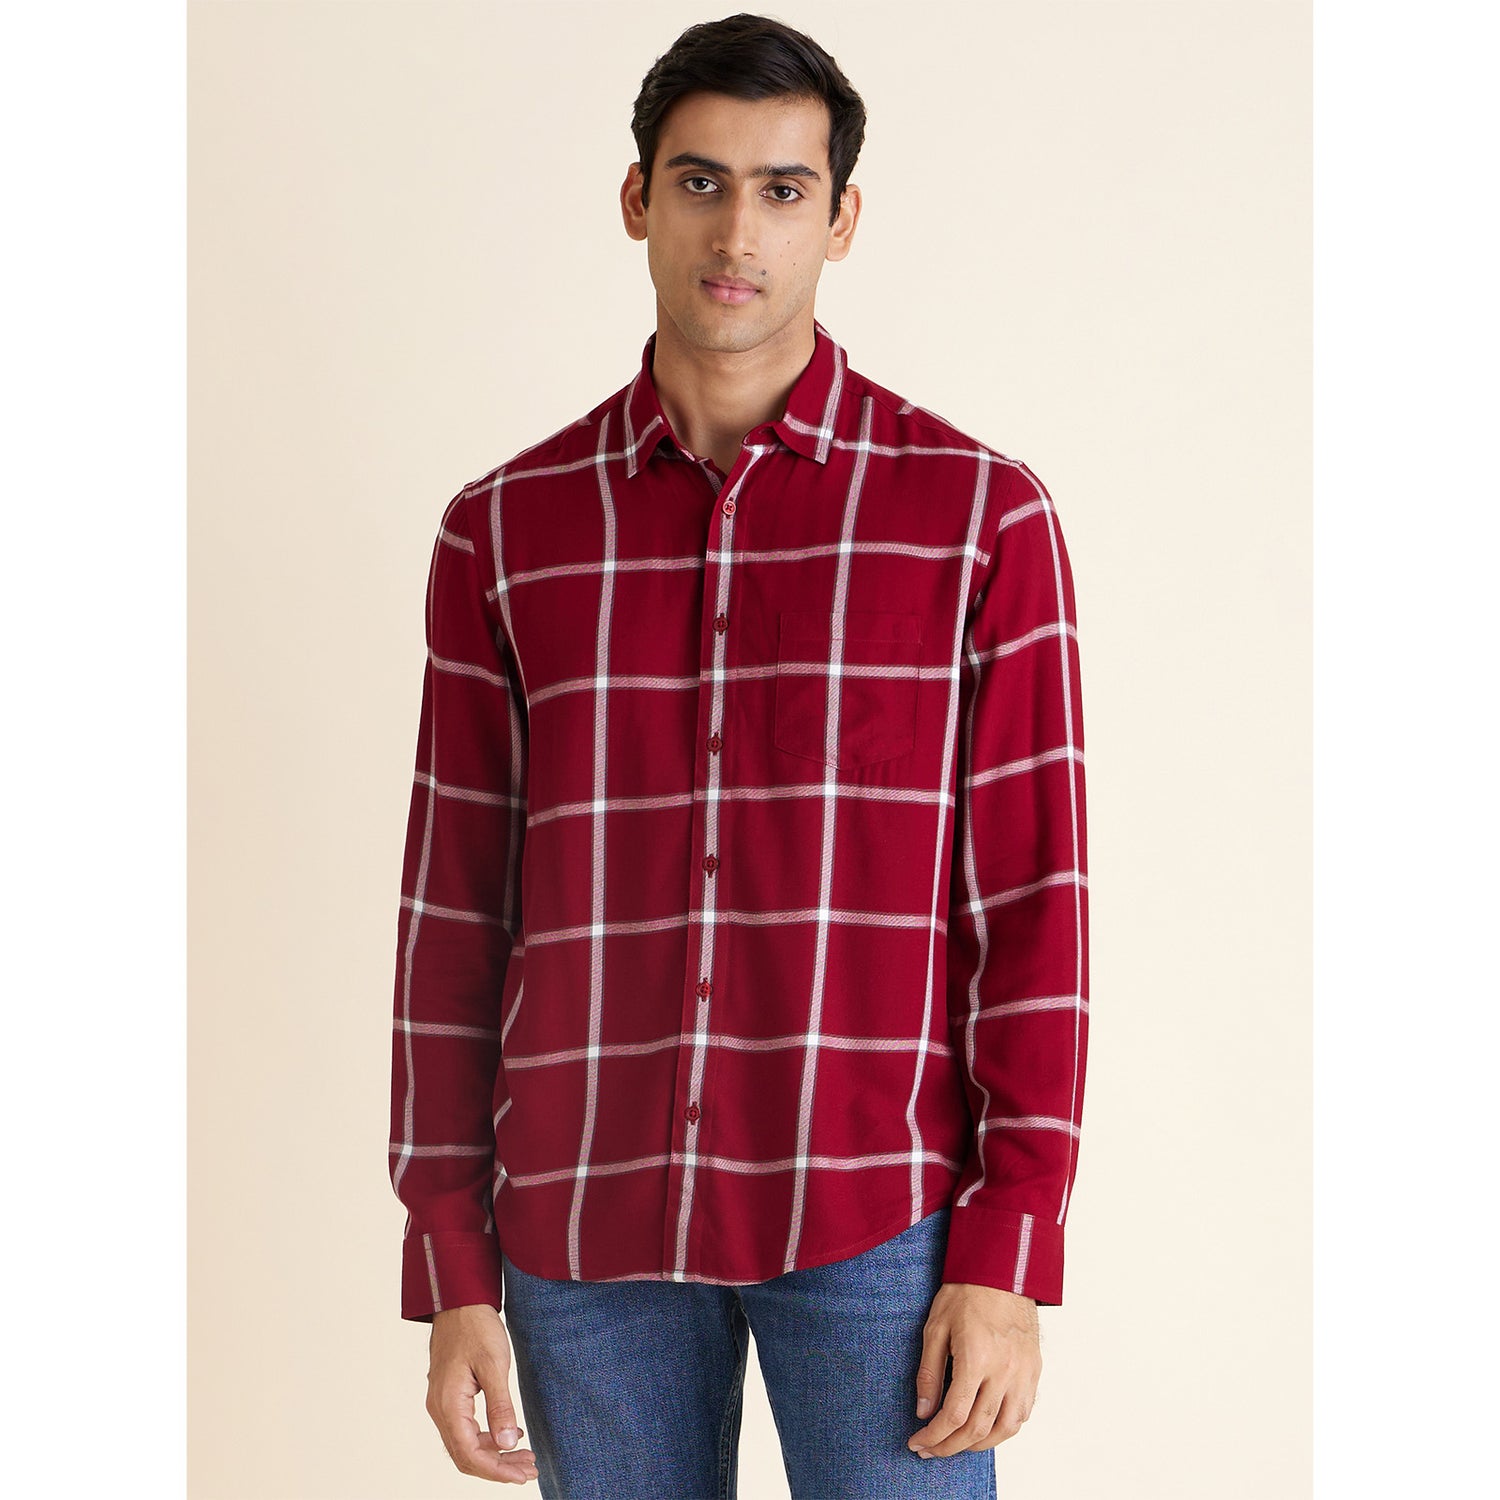 Men All Over Print Red Long Sleeve shirt (Various Sizes)